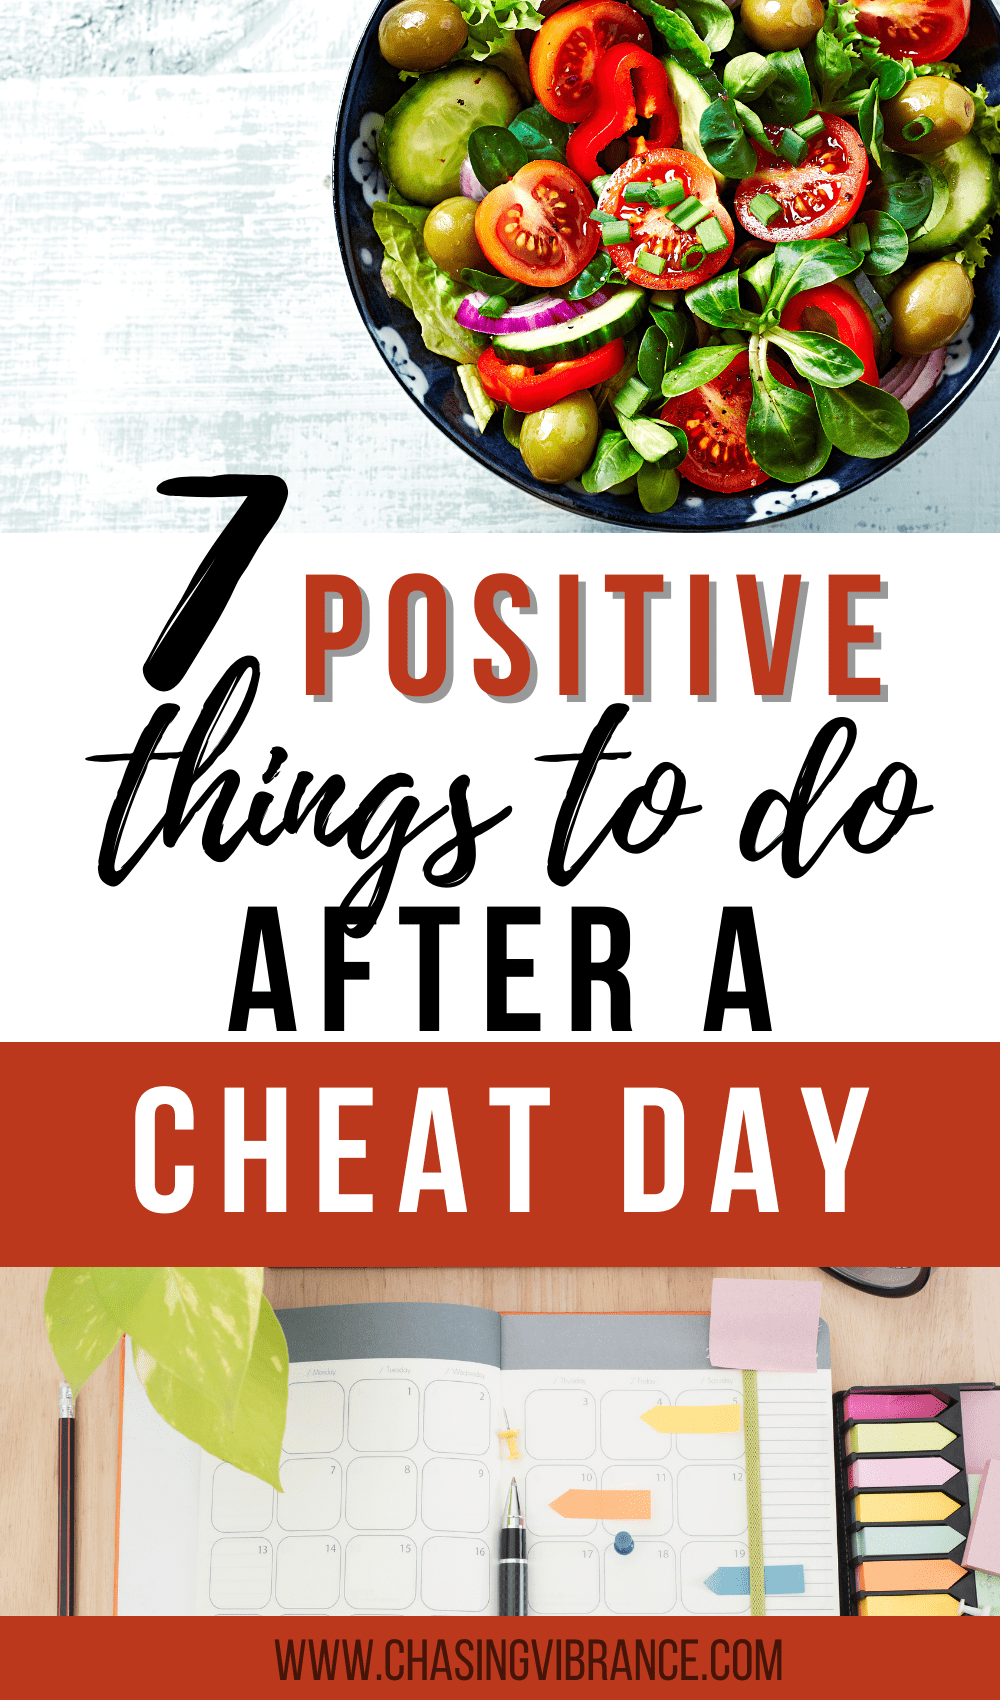 7 Positive Things To Do After a Cheat Day